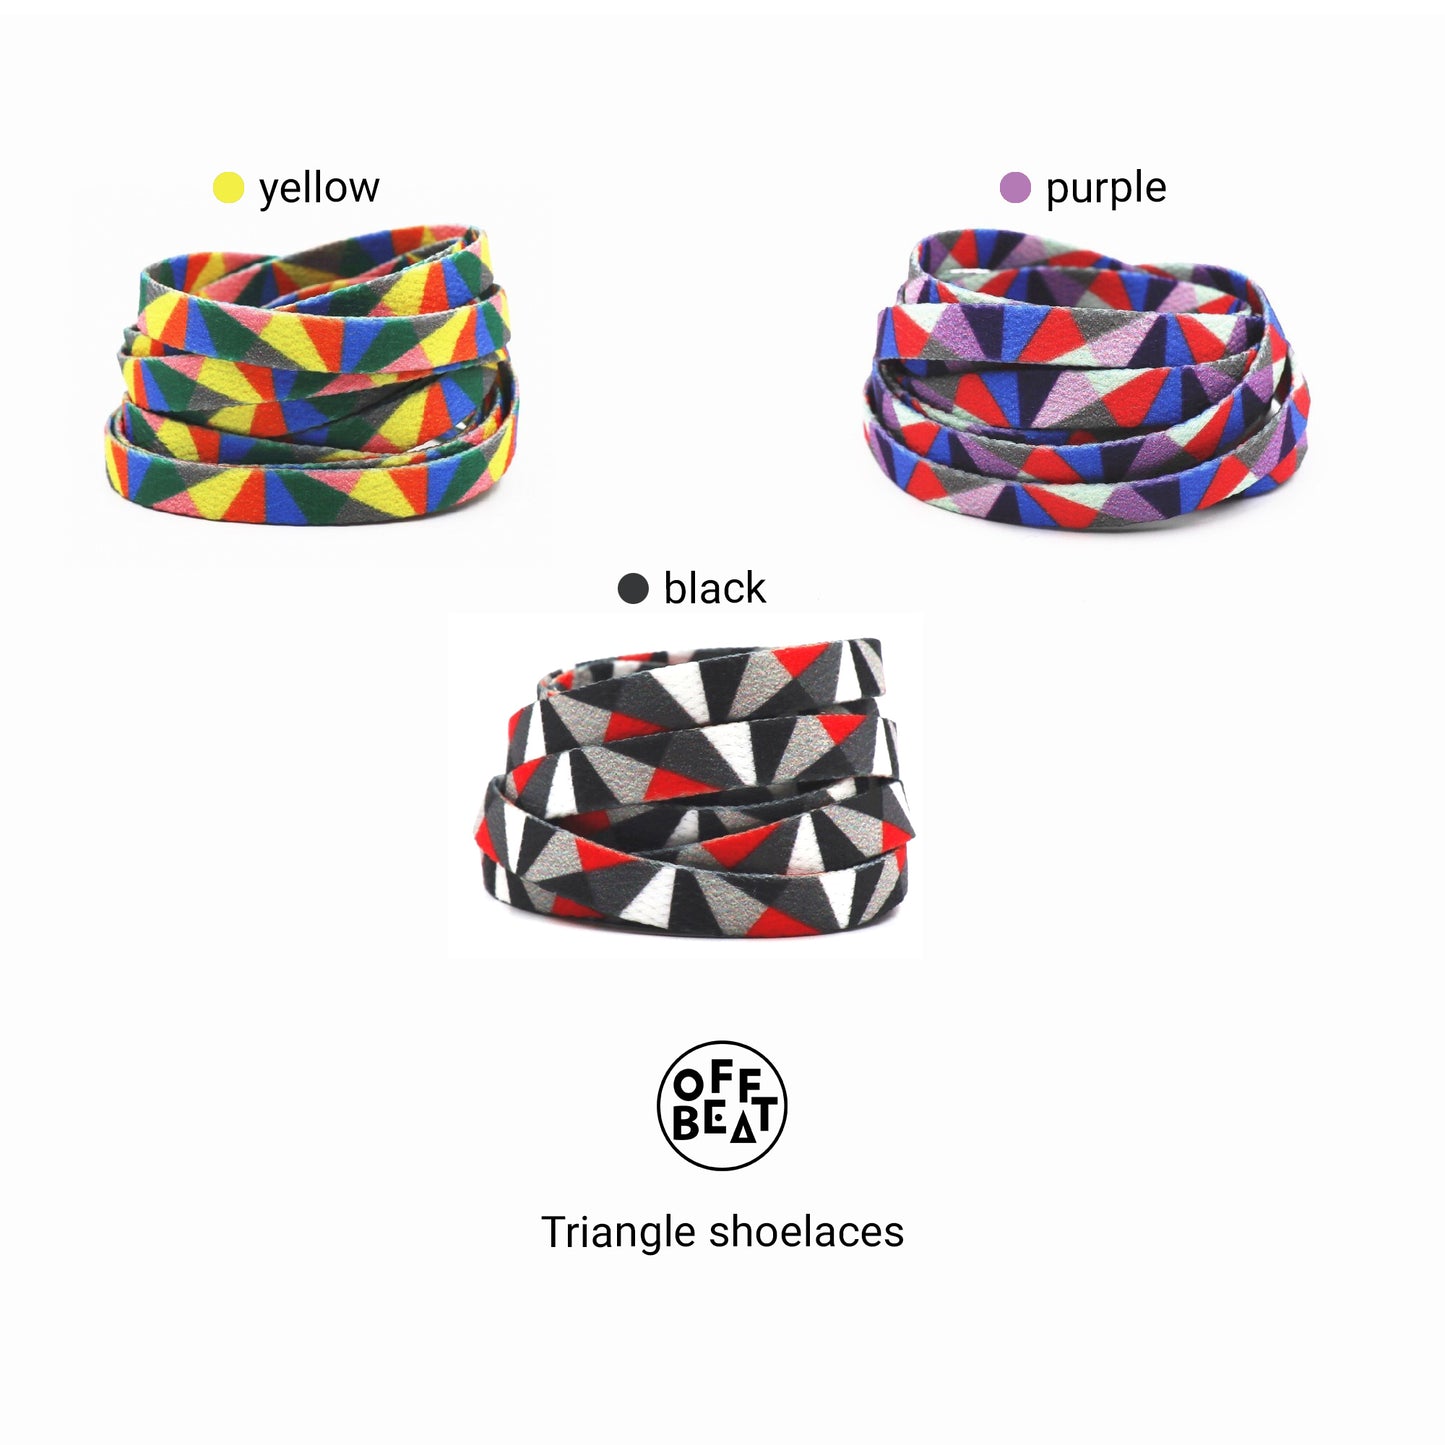 Triangle shoelaces